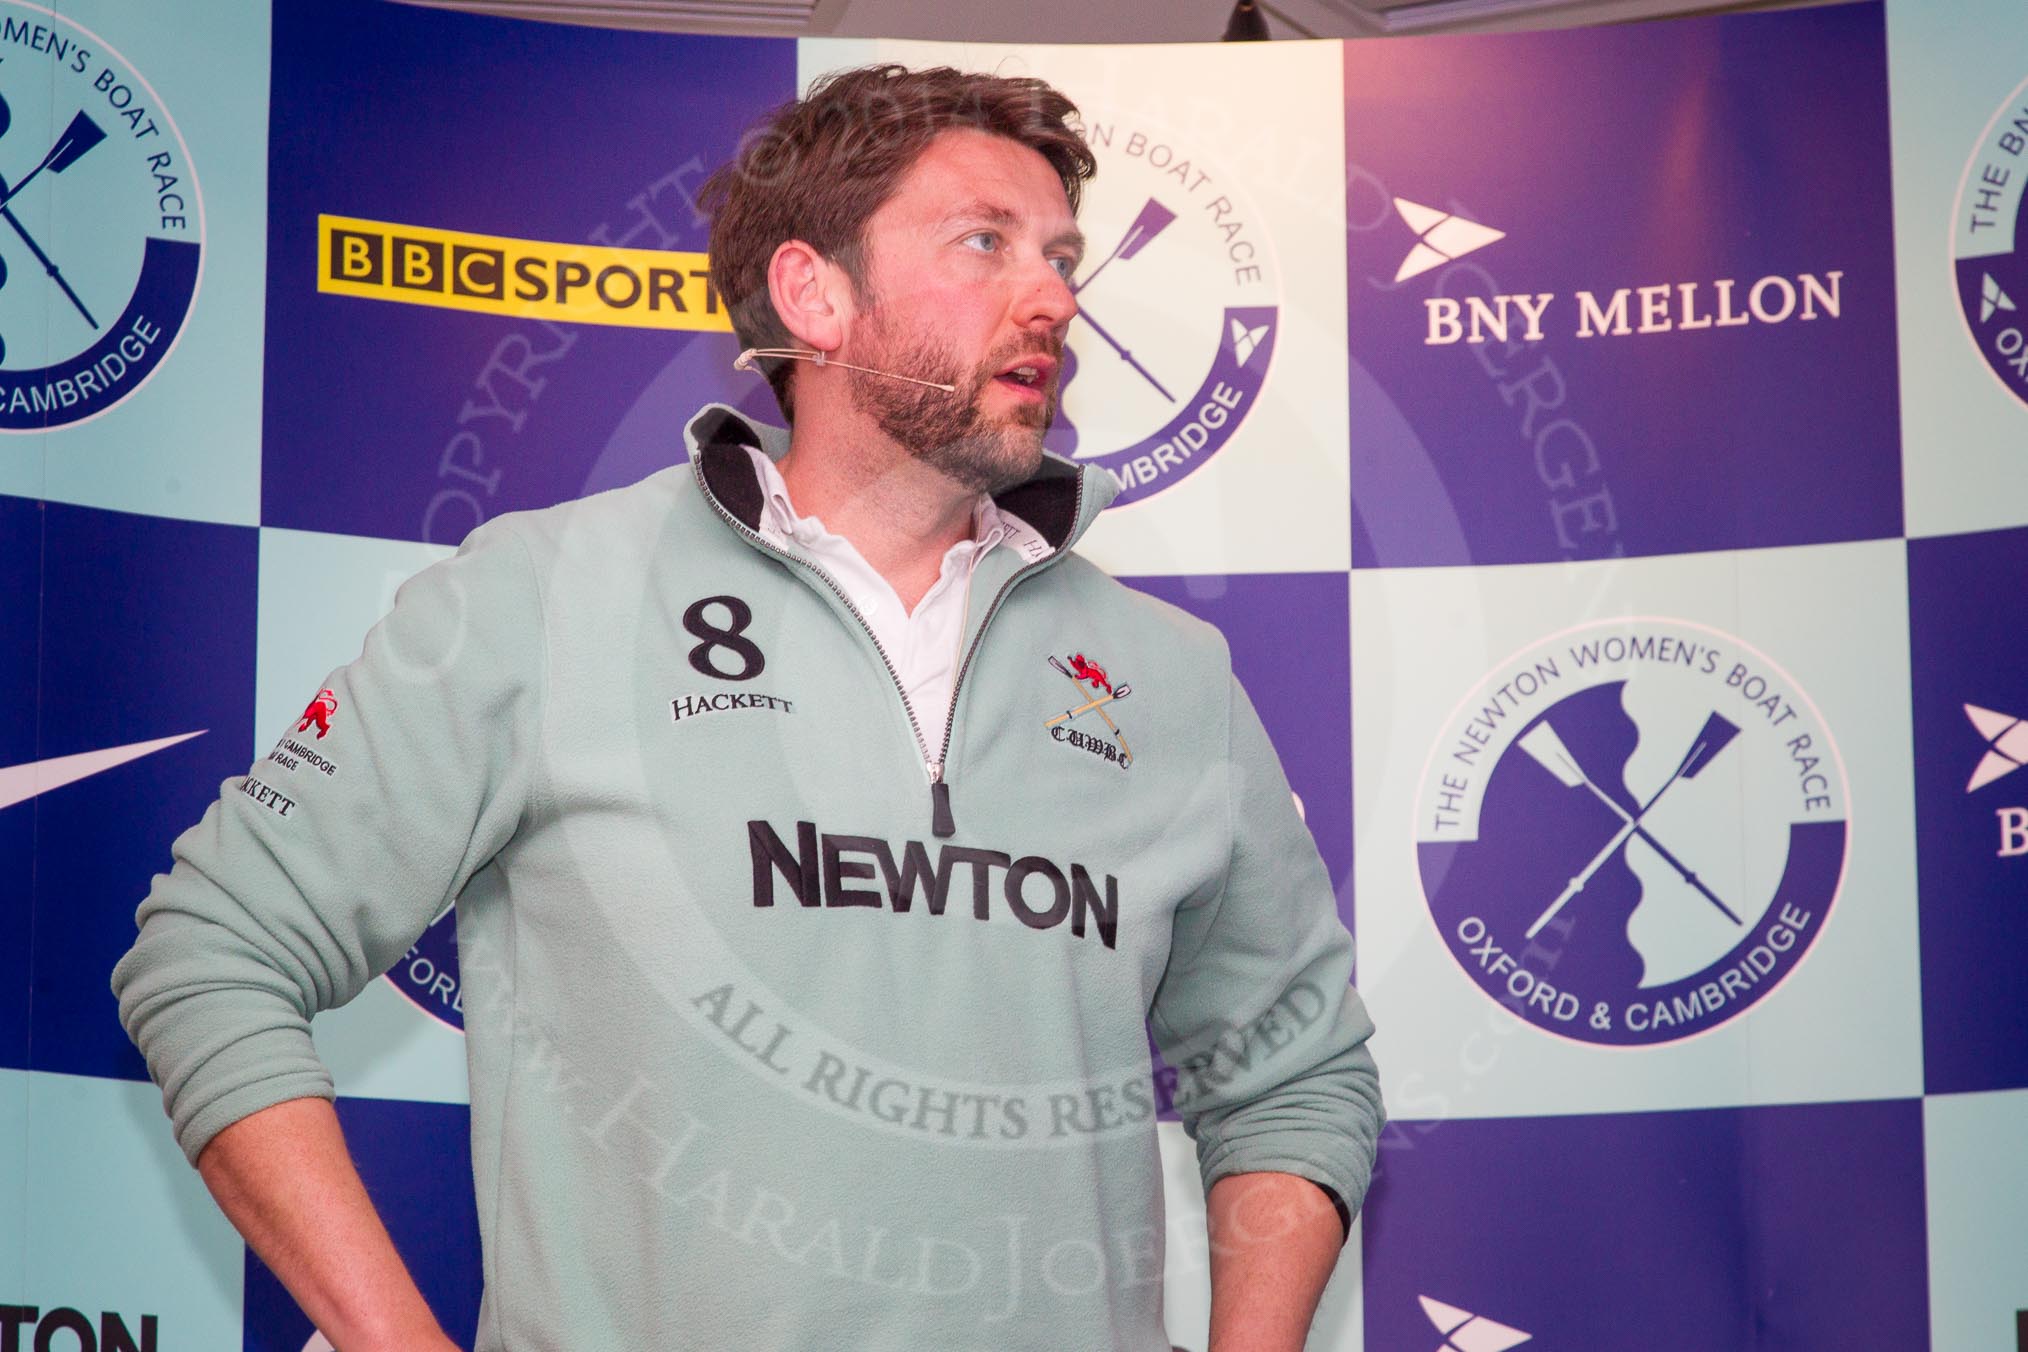 The Boat Race season 2014 - Crew Announcement and Weigh In: The 2014 Women's Boat Race coaches: Rob Baker, Cambridge..
BNY Mellon Centre,
London EC4V 4LA,
London,
United Kingdom,
on 10 March 2014 at 11:52, image #62